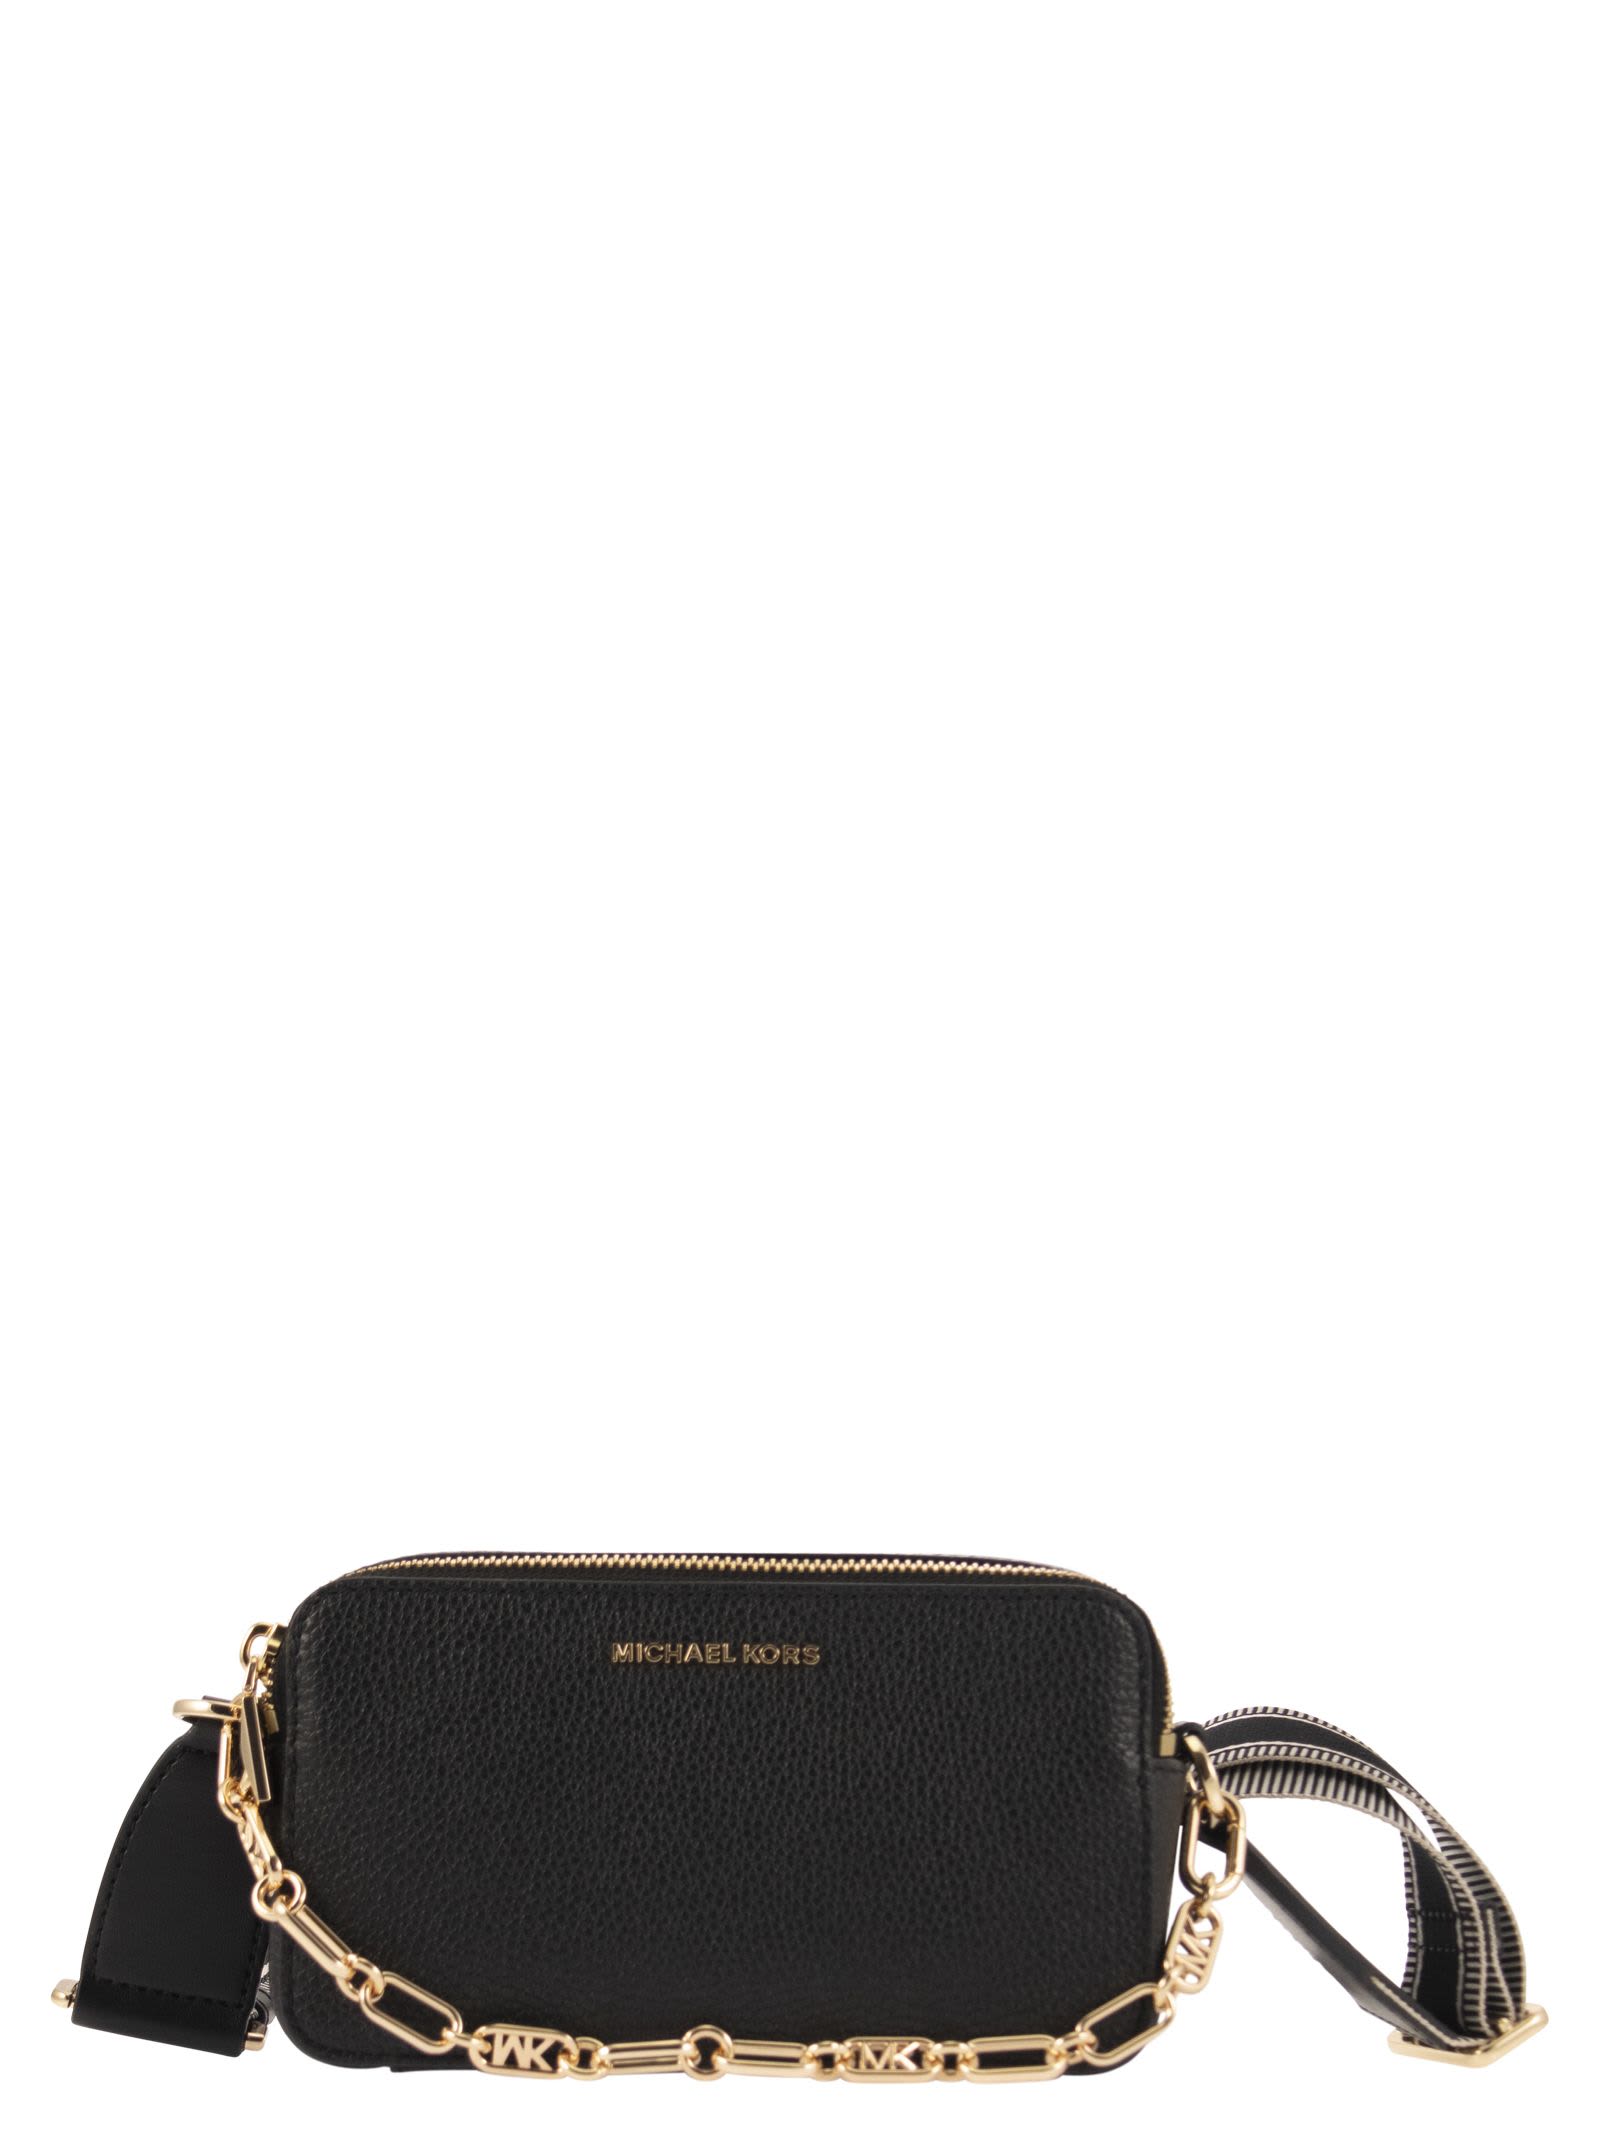 MICHAEL KORS JET SET SMALL CHAMBER BAG IN GRAINED LEATHER WITH DOUBLE ZIP